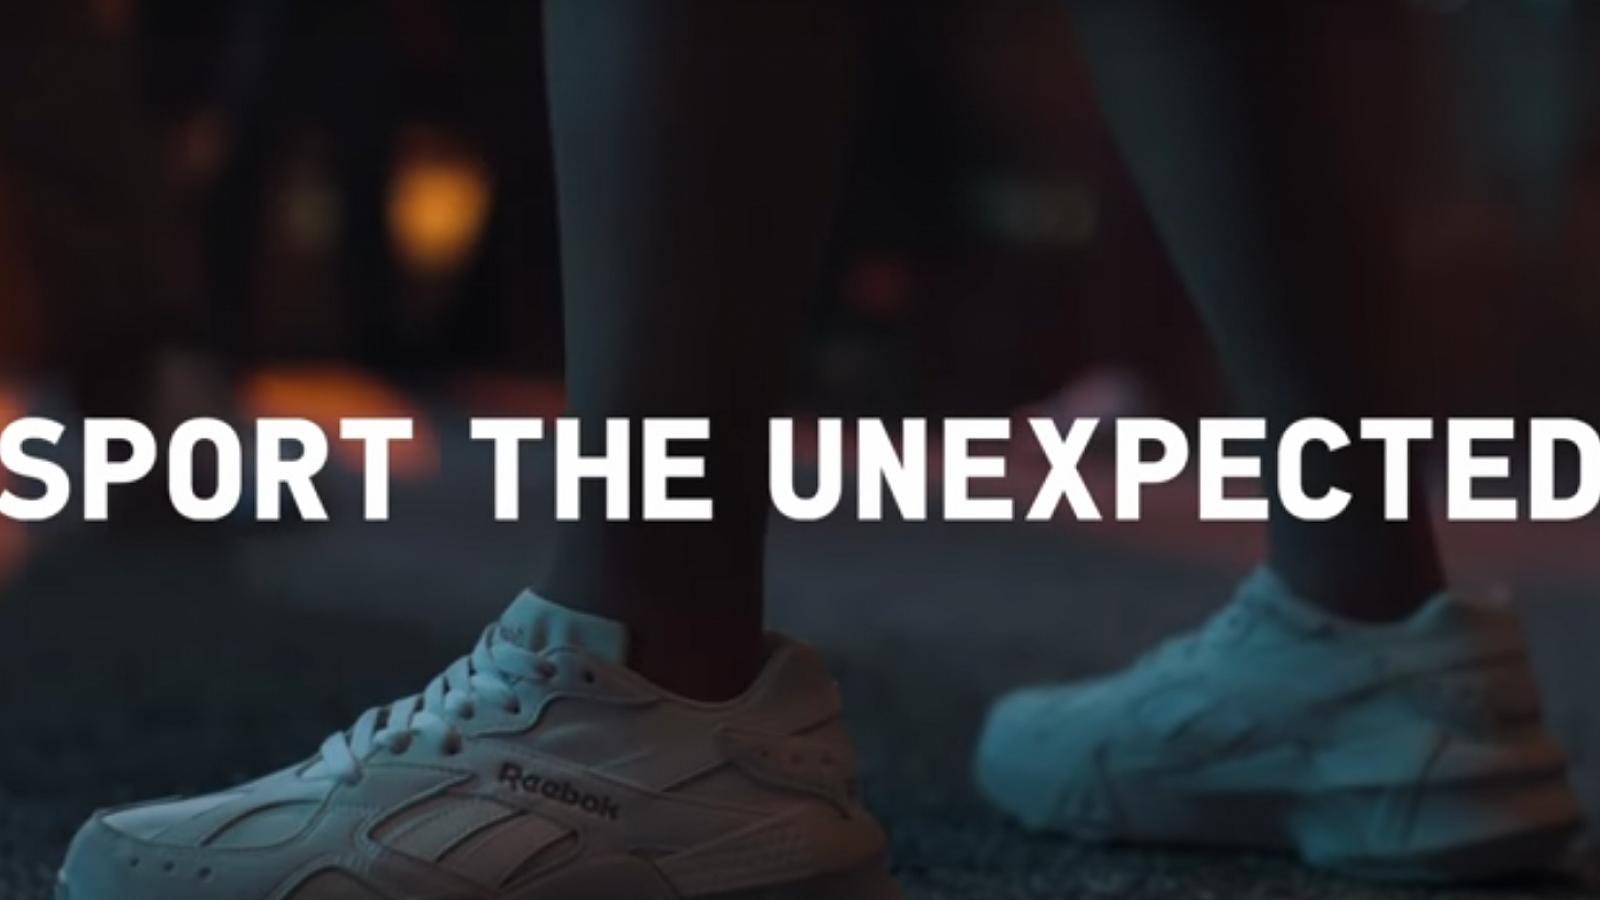 Reebok targets new audience with ‘Sport the Unexpected’ campaign